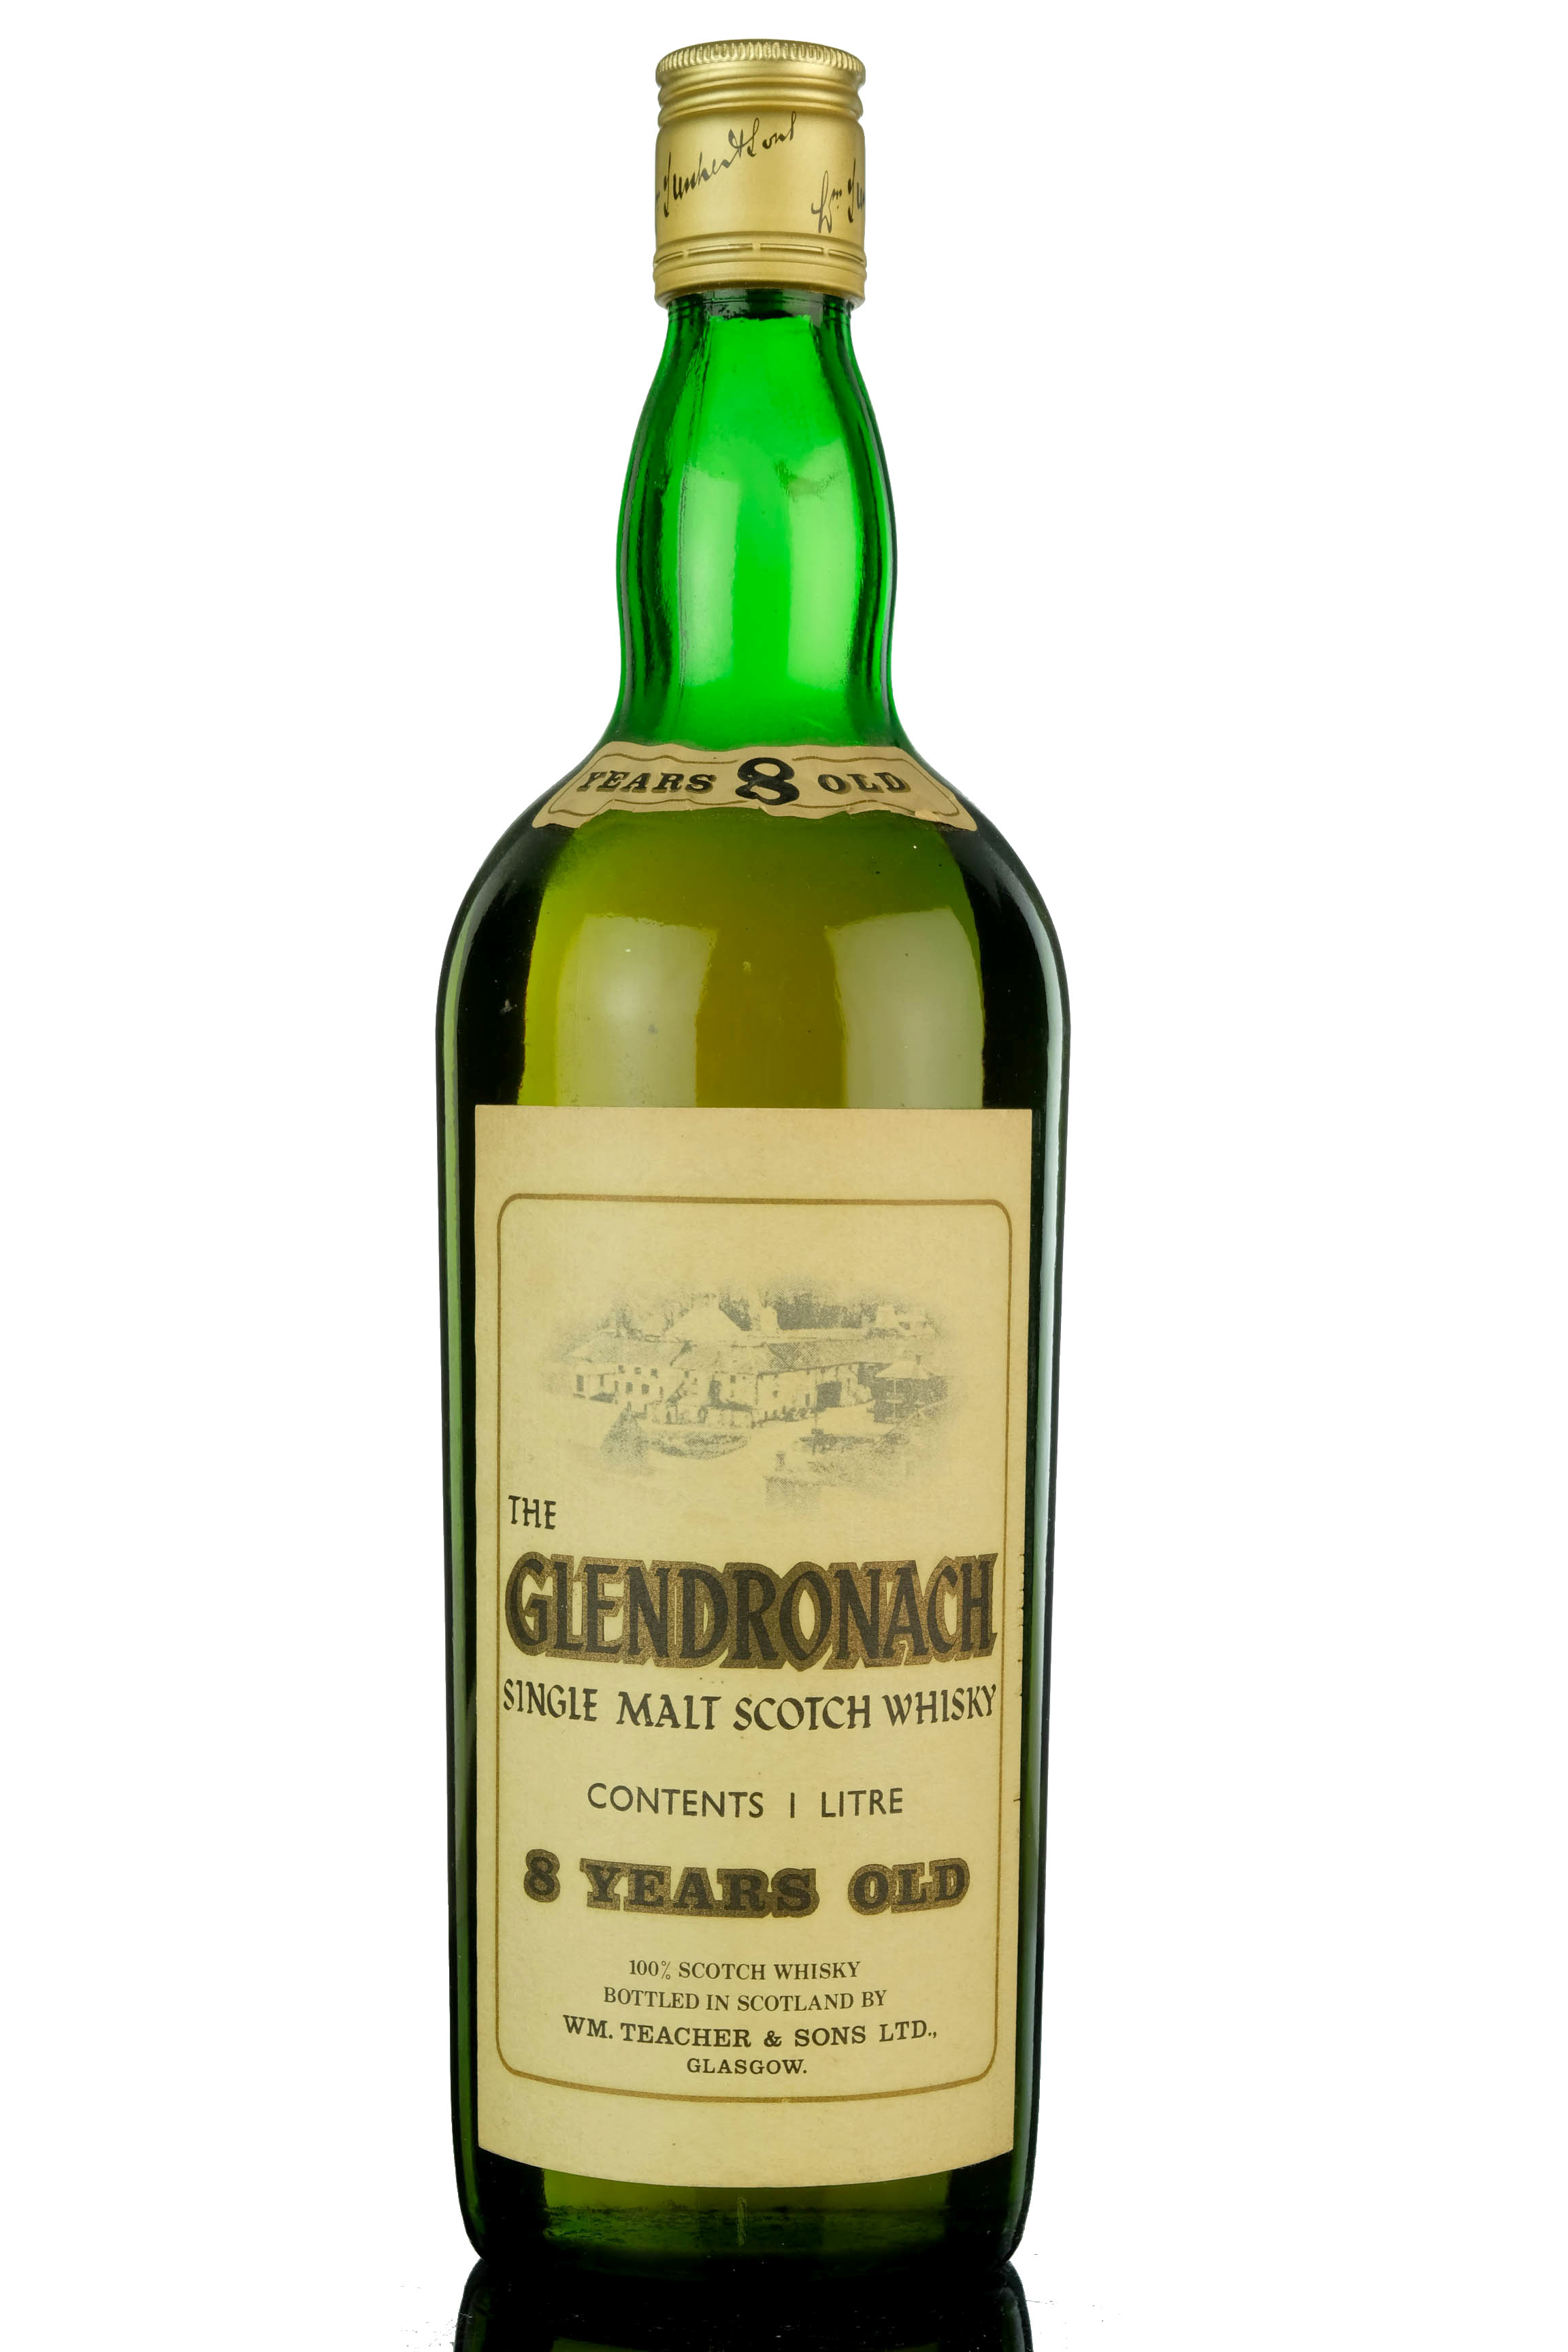 Glendronach 8 Year Old - 1 Litre